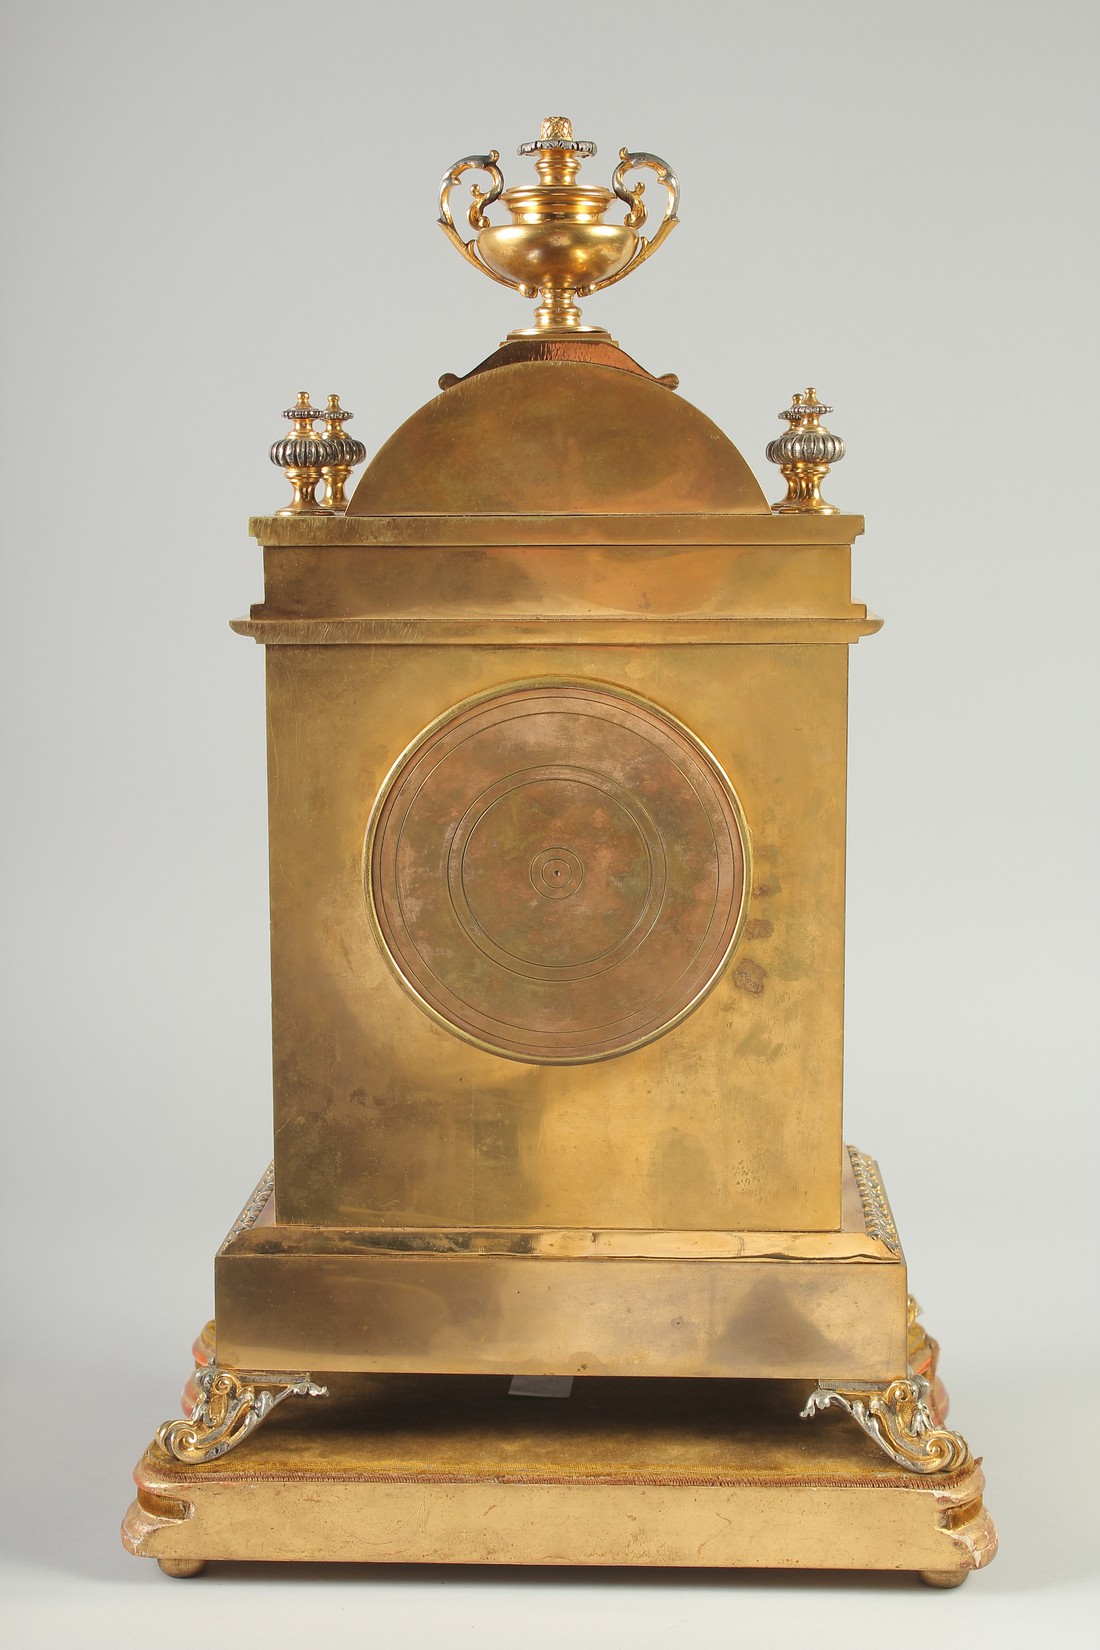 A GOOD 19TH CENTURY FRENCH ORMOLU MANTLE CLOCK possibly by ACHILLE BROCOT, with eight day movement - Image 3 of 6